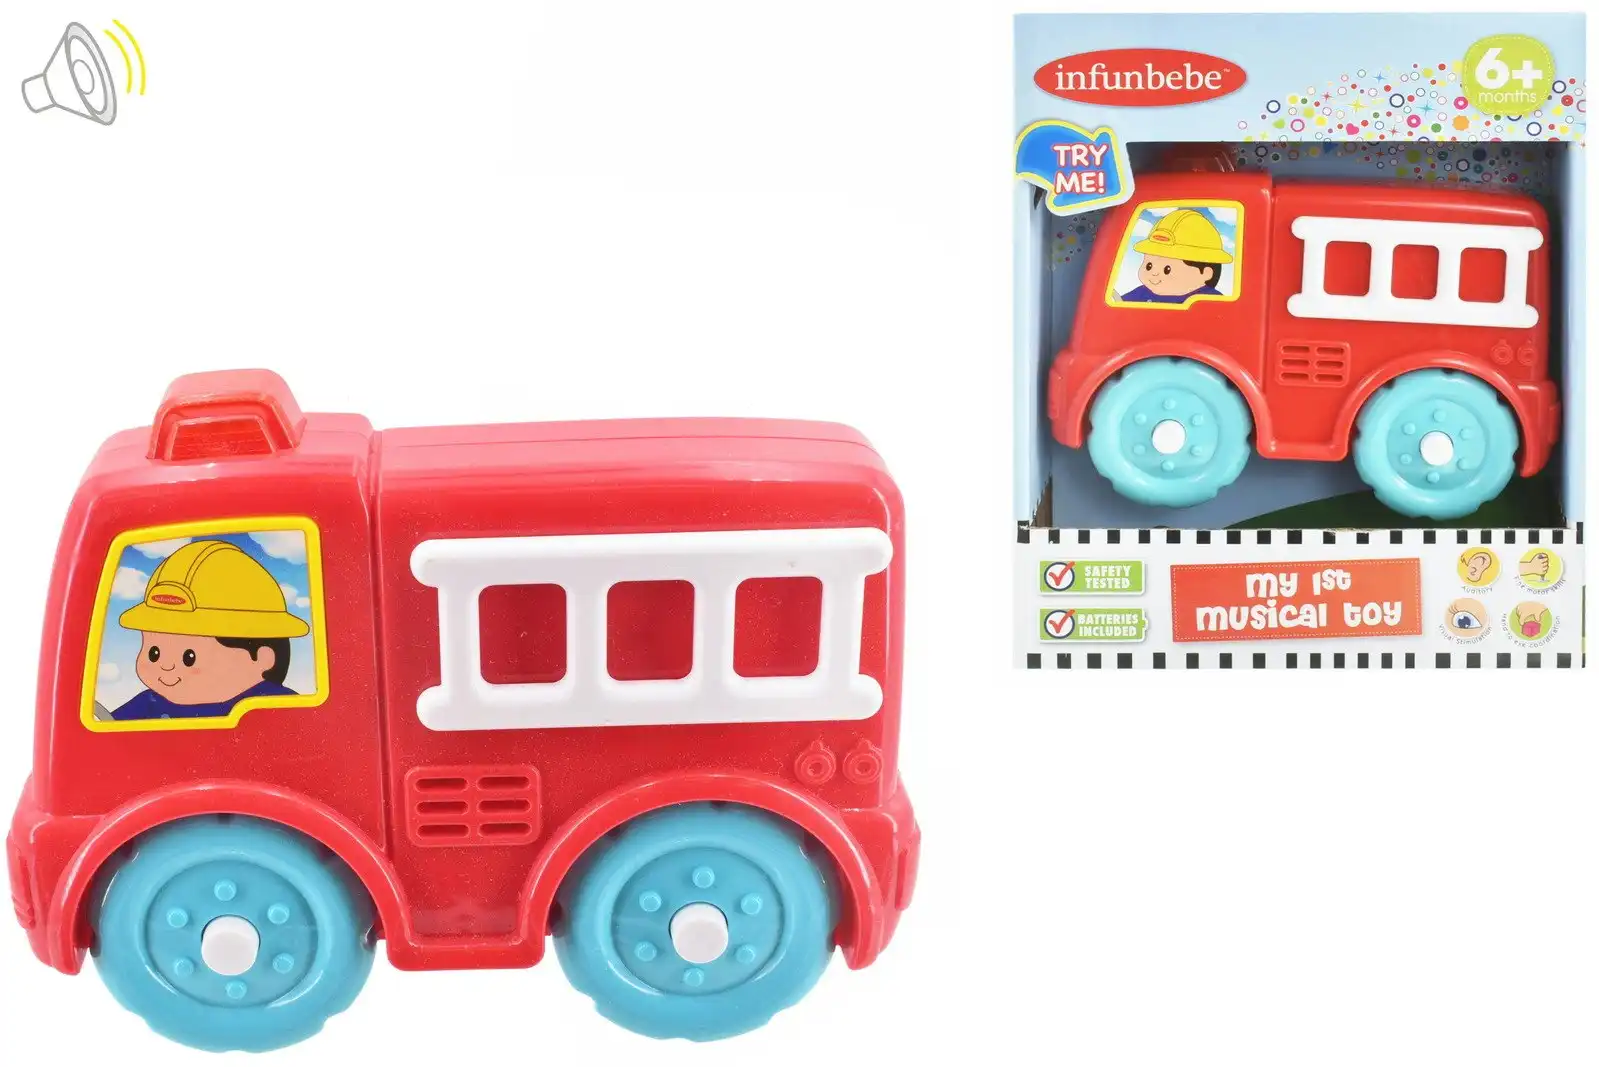 Infunbebe My 1st Musical Toy Fire Engine